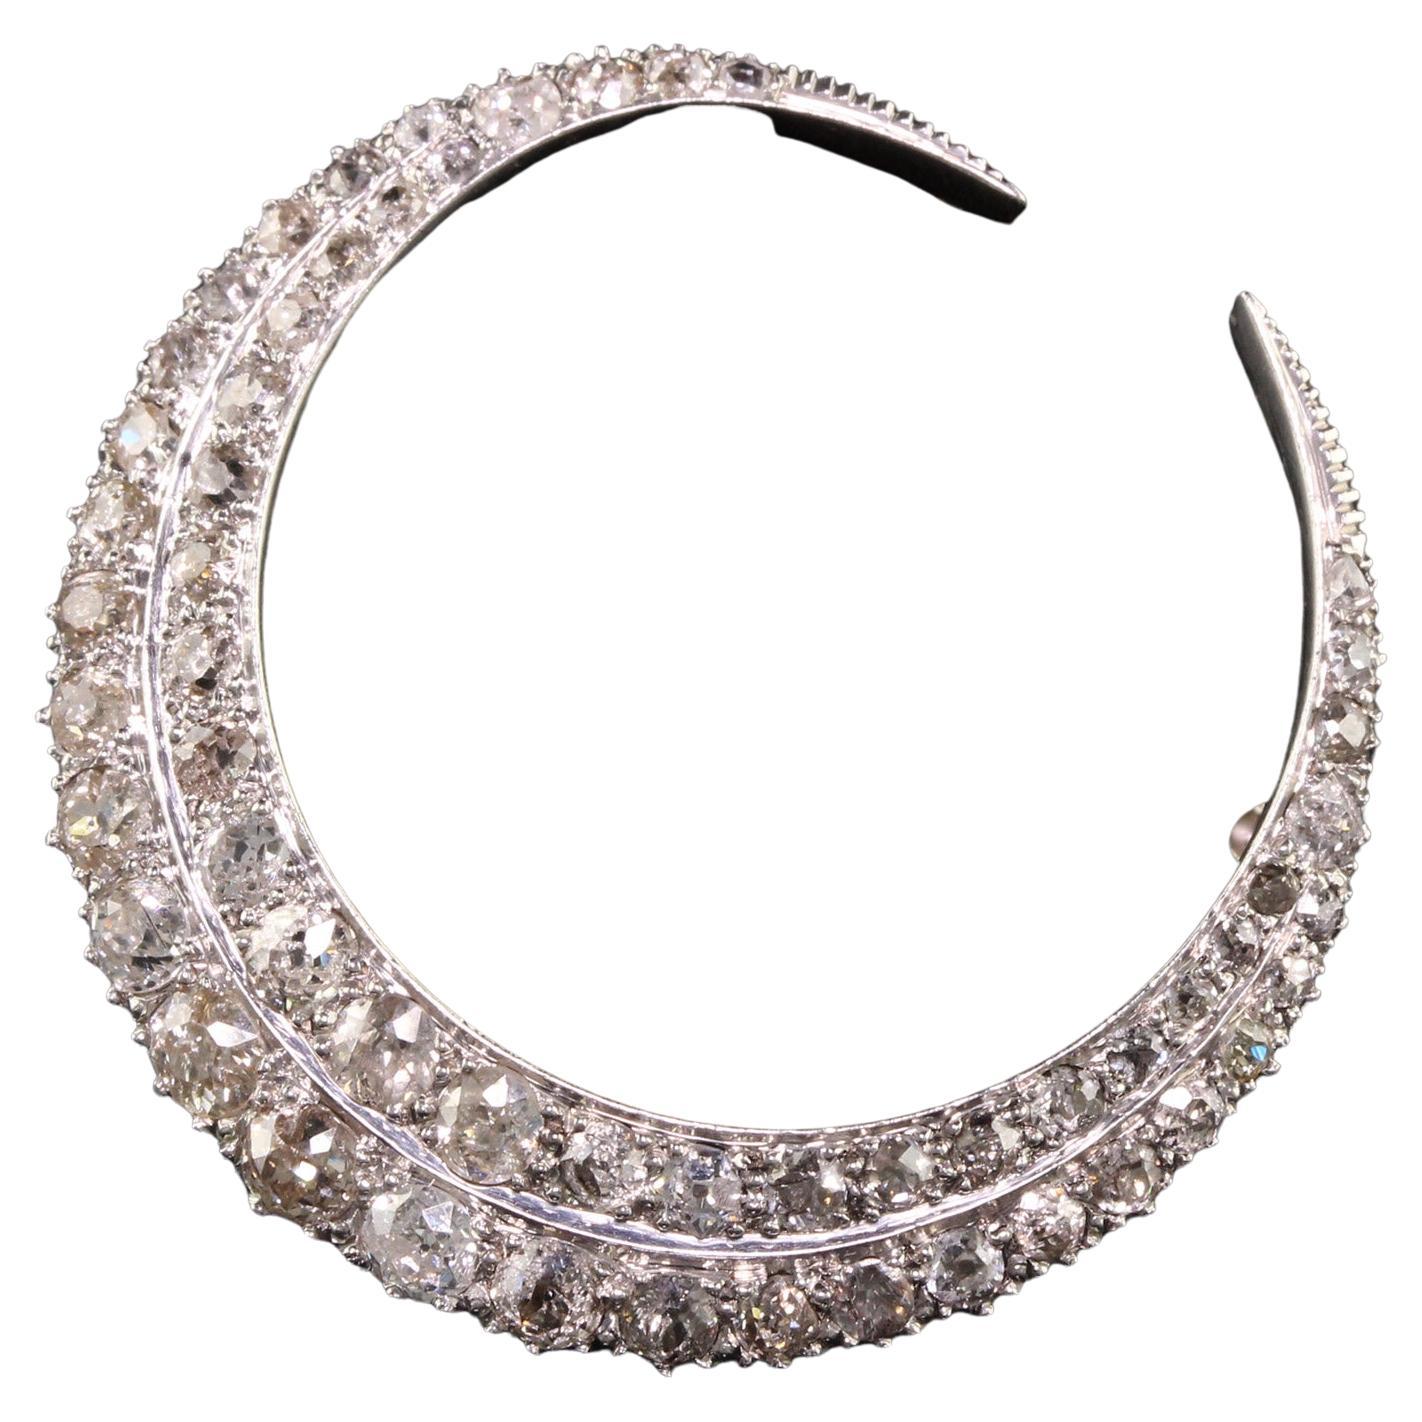 Beautiful Antique Art Deco Platinum Old Mine Diamond Crescent Pin. This gorgeous pin is crafted in platinum and the closing pin is crafted in 14k white gold. This beautiful pin has old mine diamonds in varying sizes and qualities set in platinum and